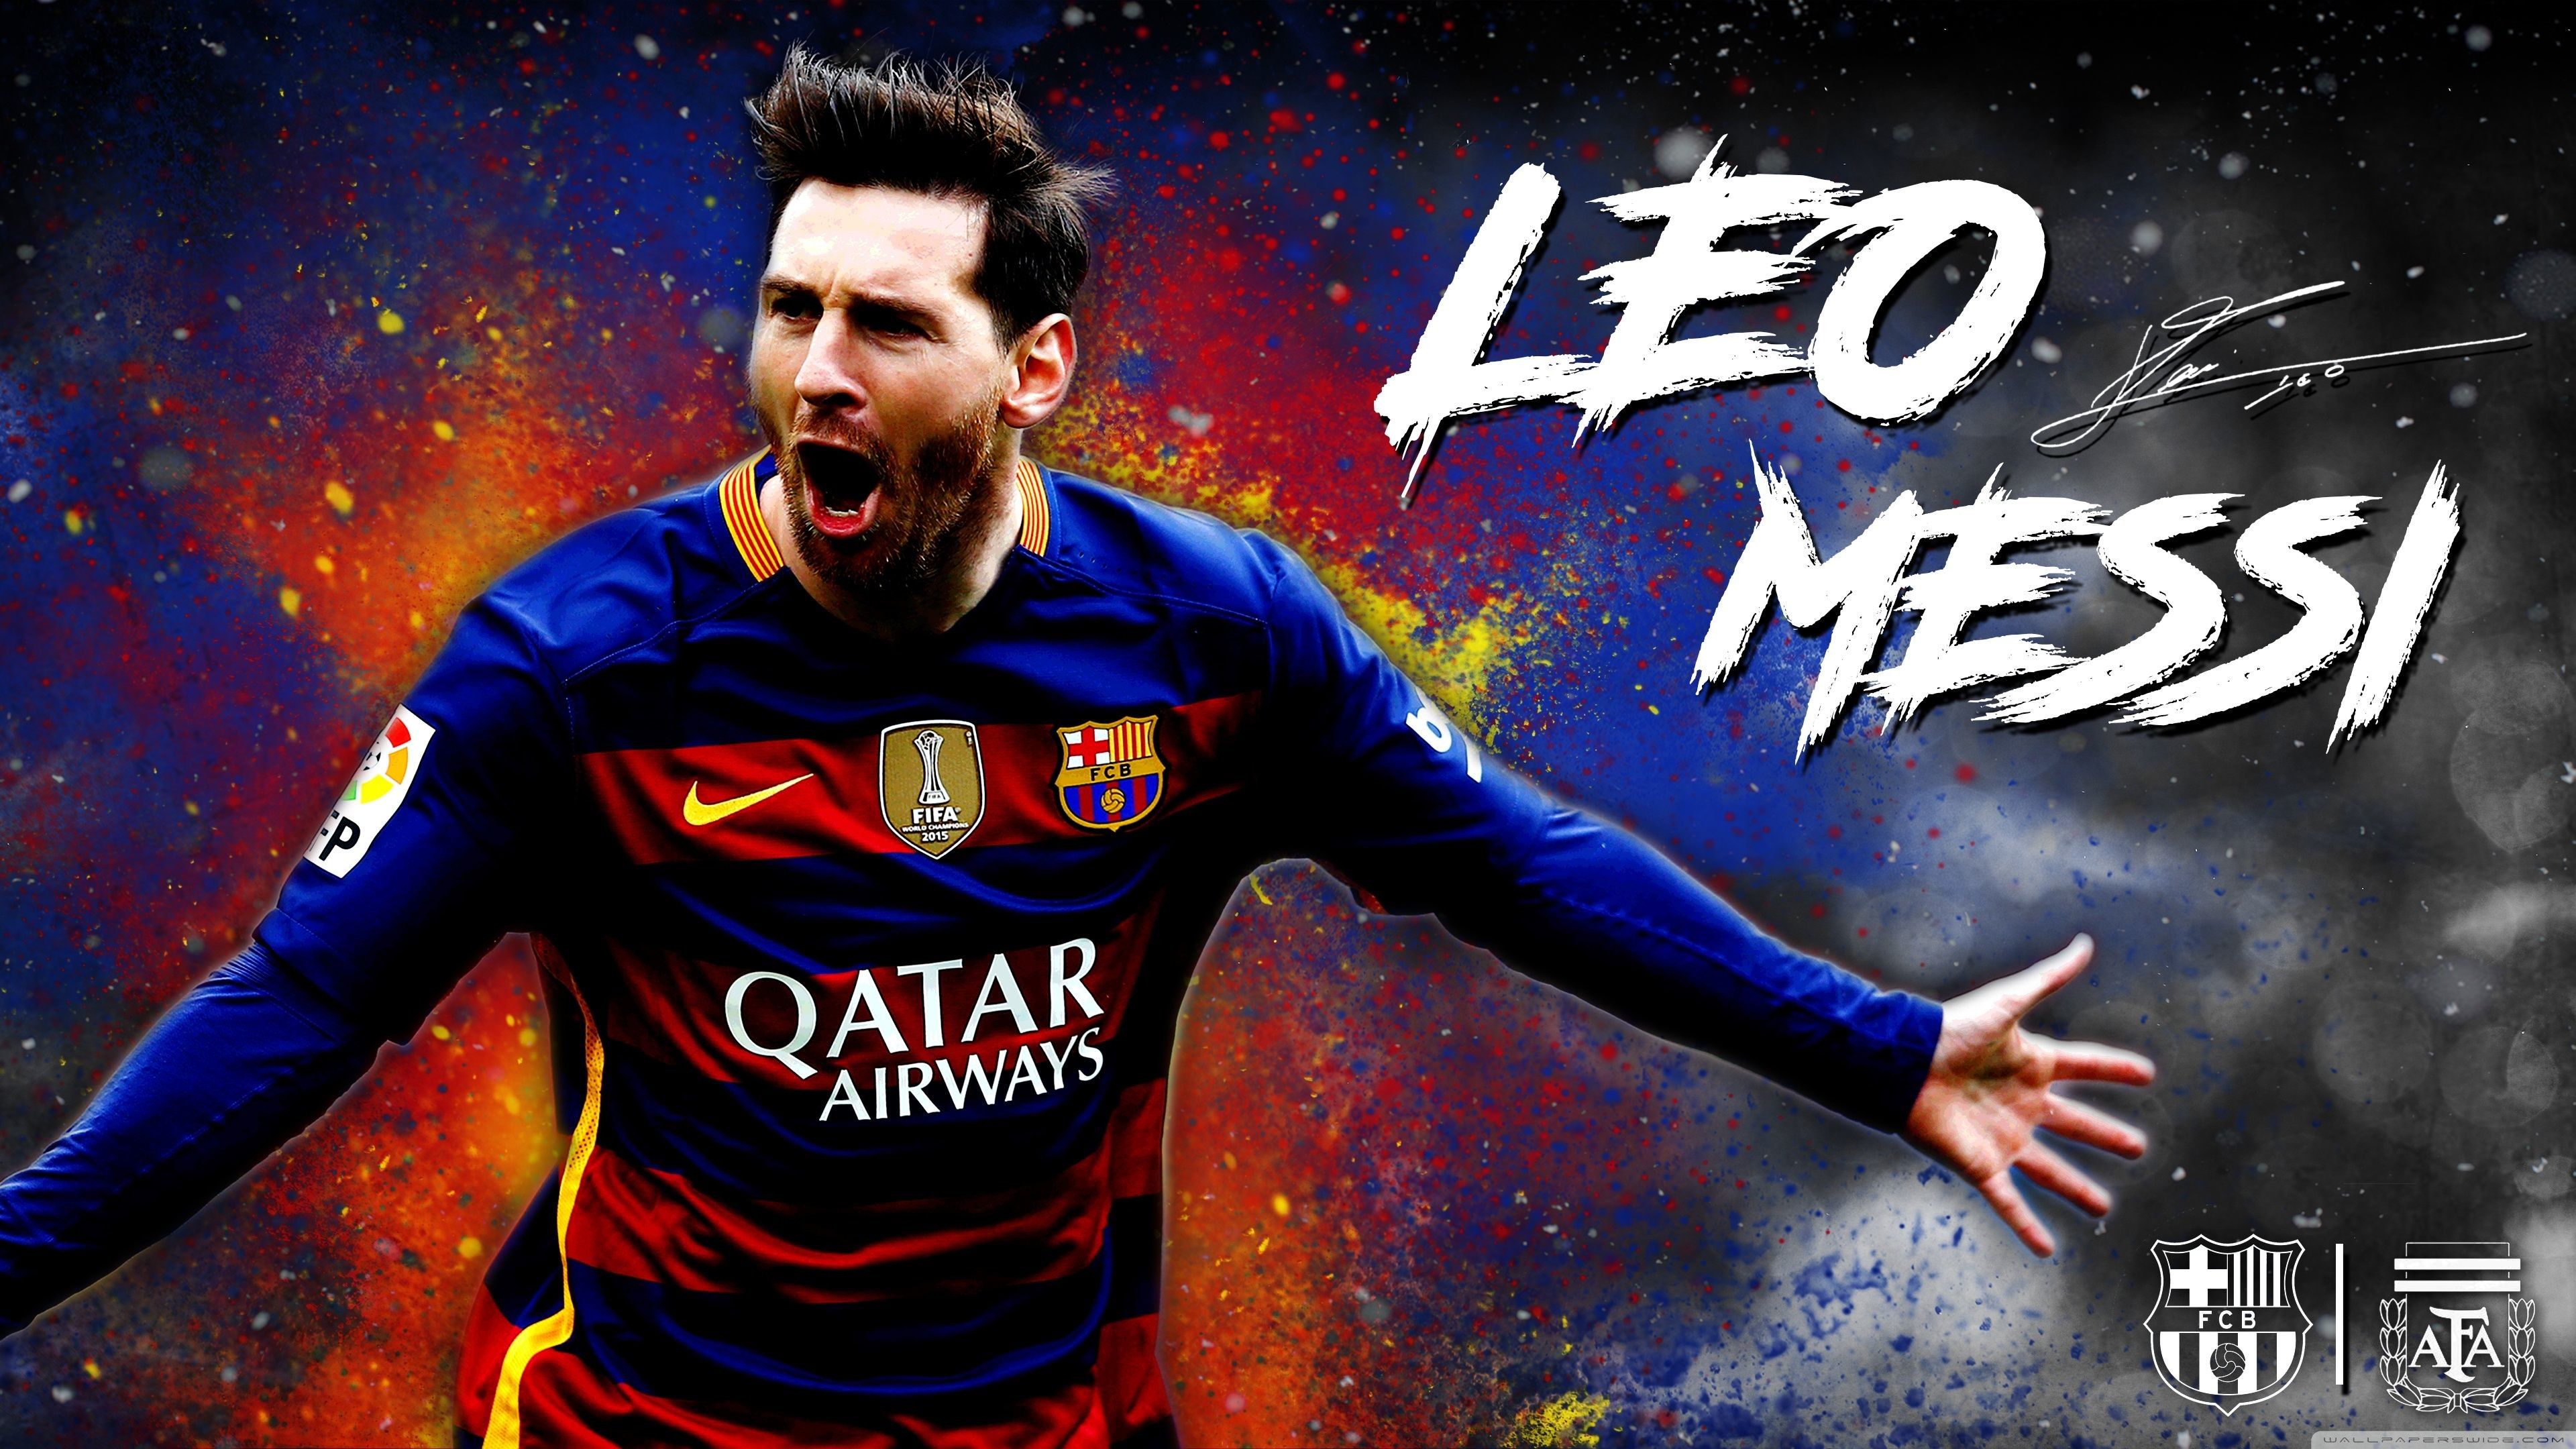 Messi Soccer Wallpaper Free Messi Soccer Background